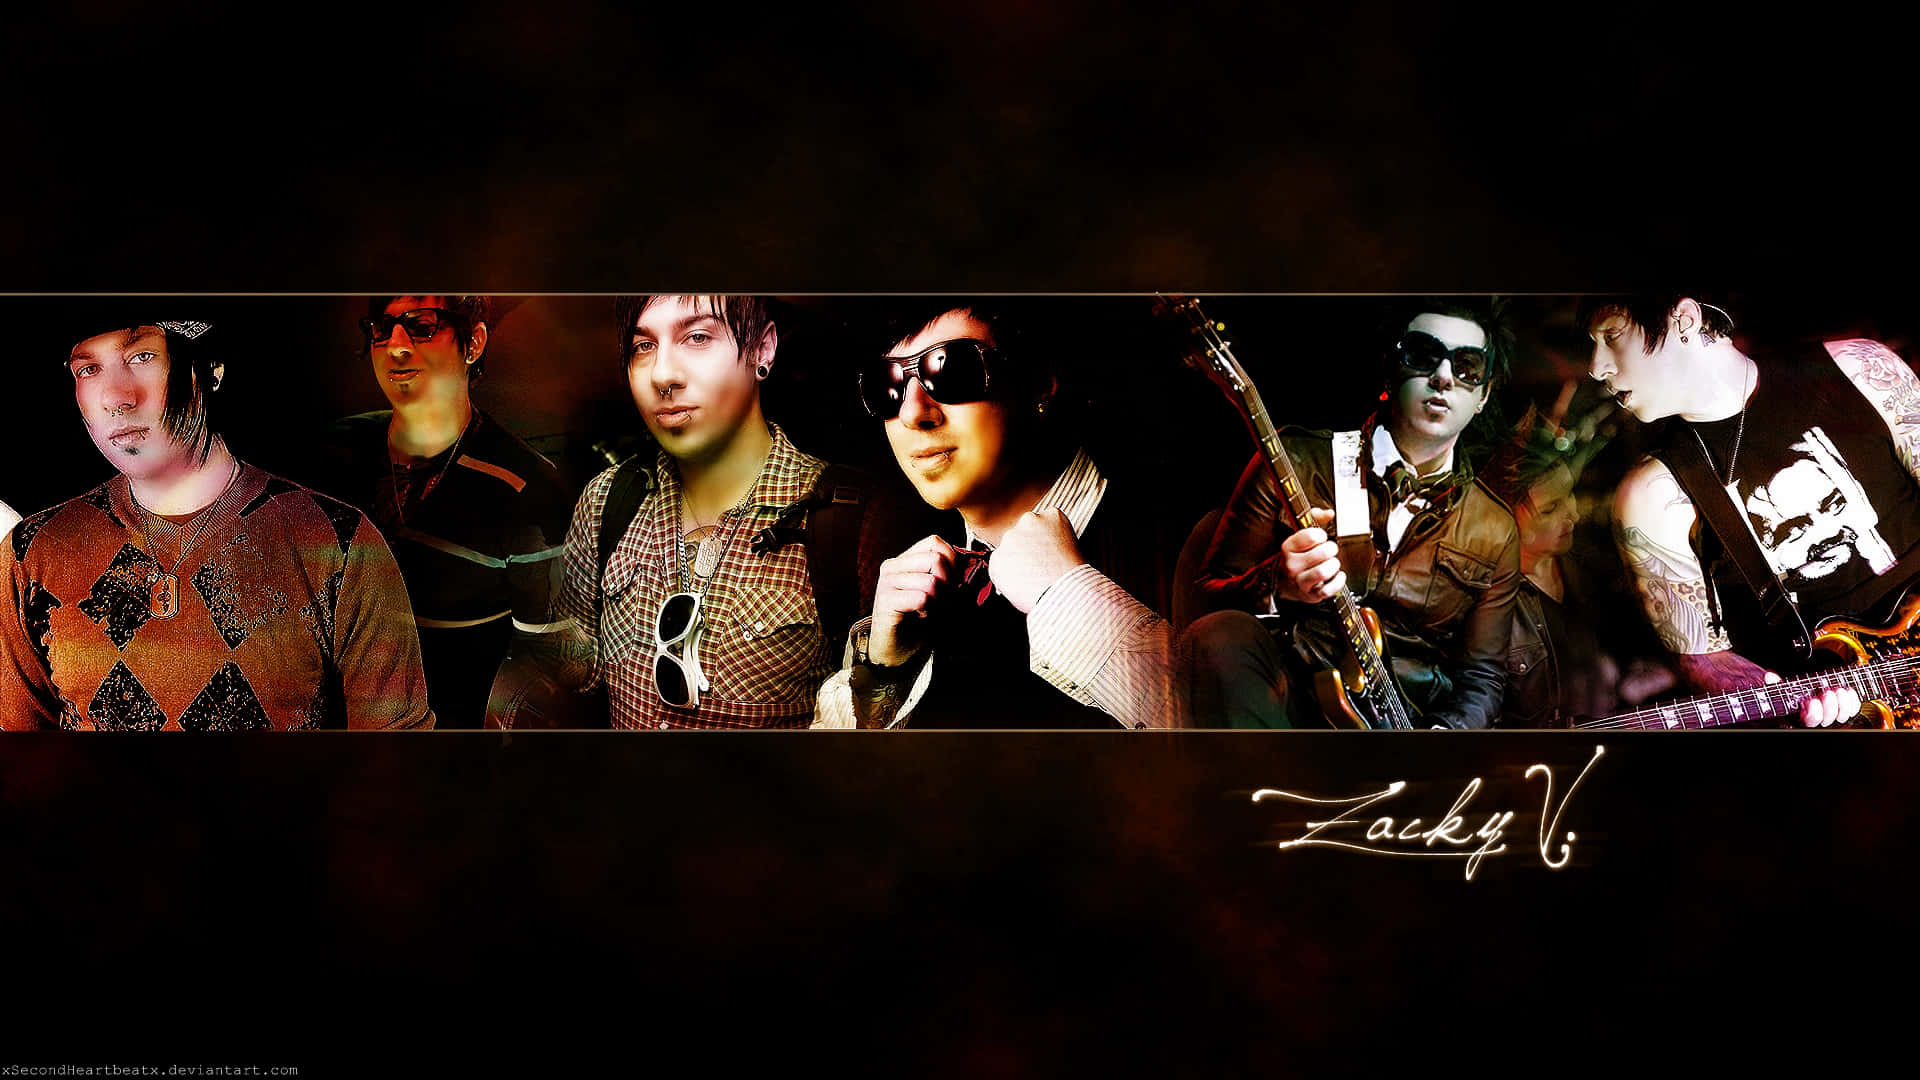 Show off your music style with an awesome Avenged Sevenfold Iphone Wallpaper Wallpaper